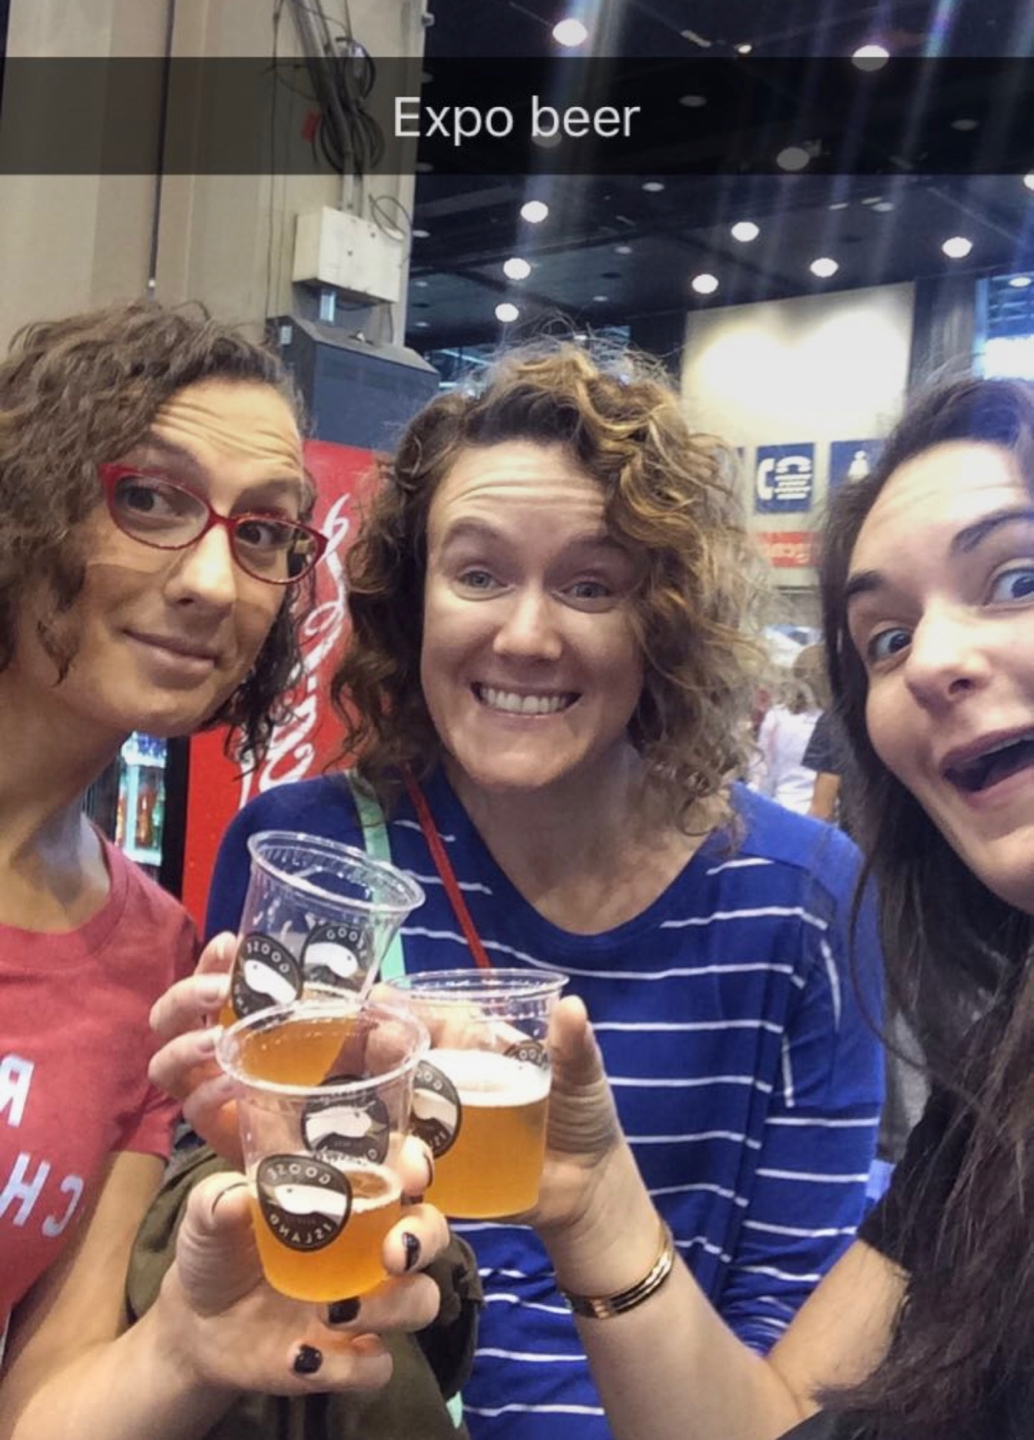 Free beer at the expo. Photo stolen from Ellen's Snapchat.